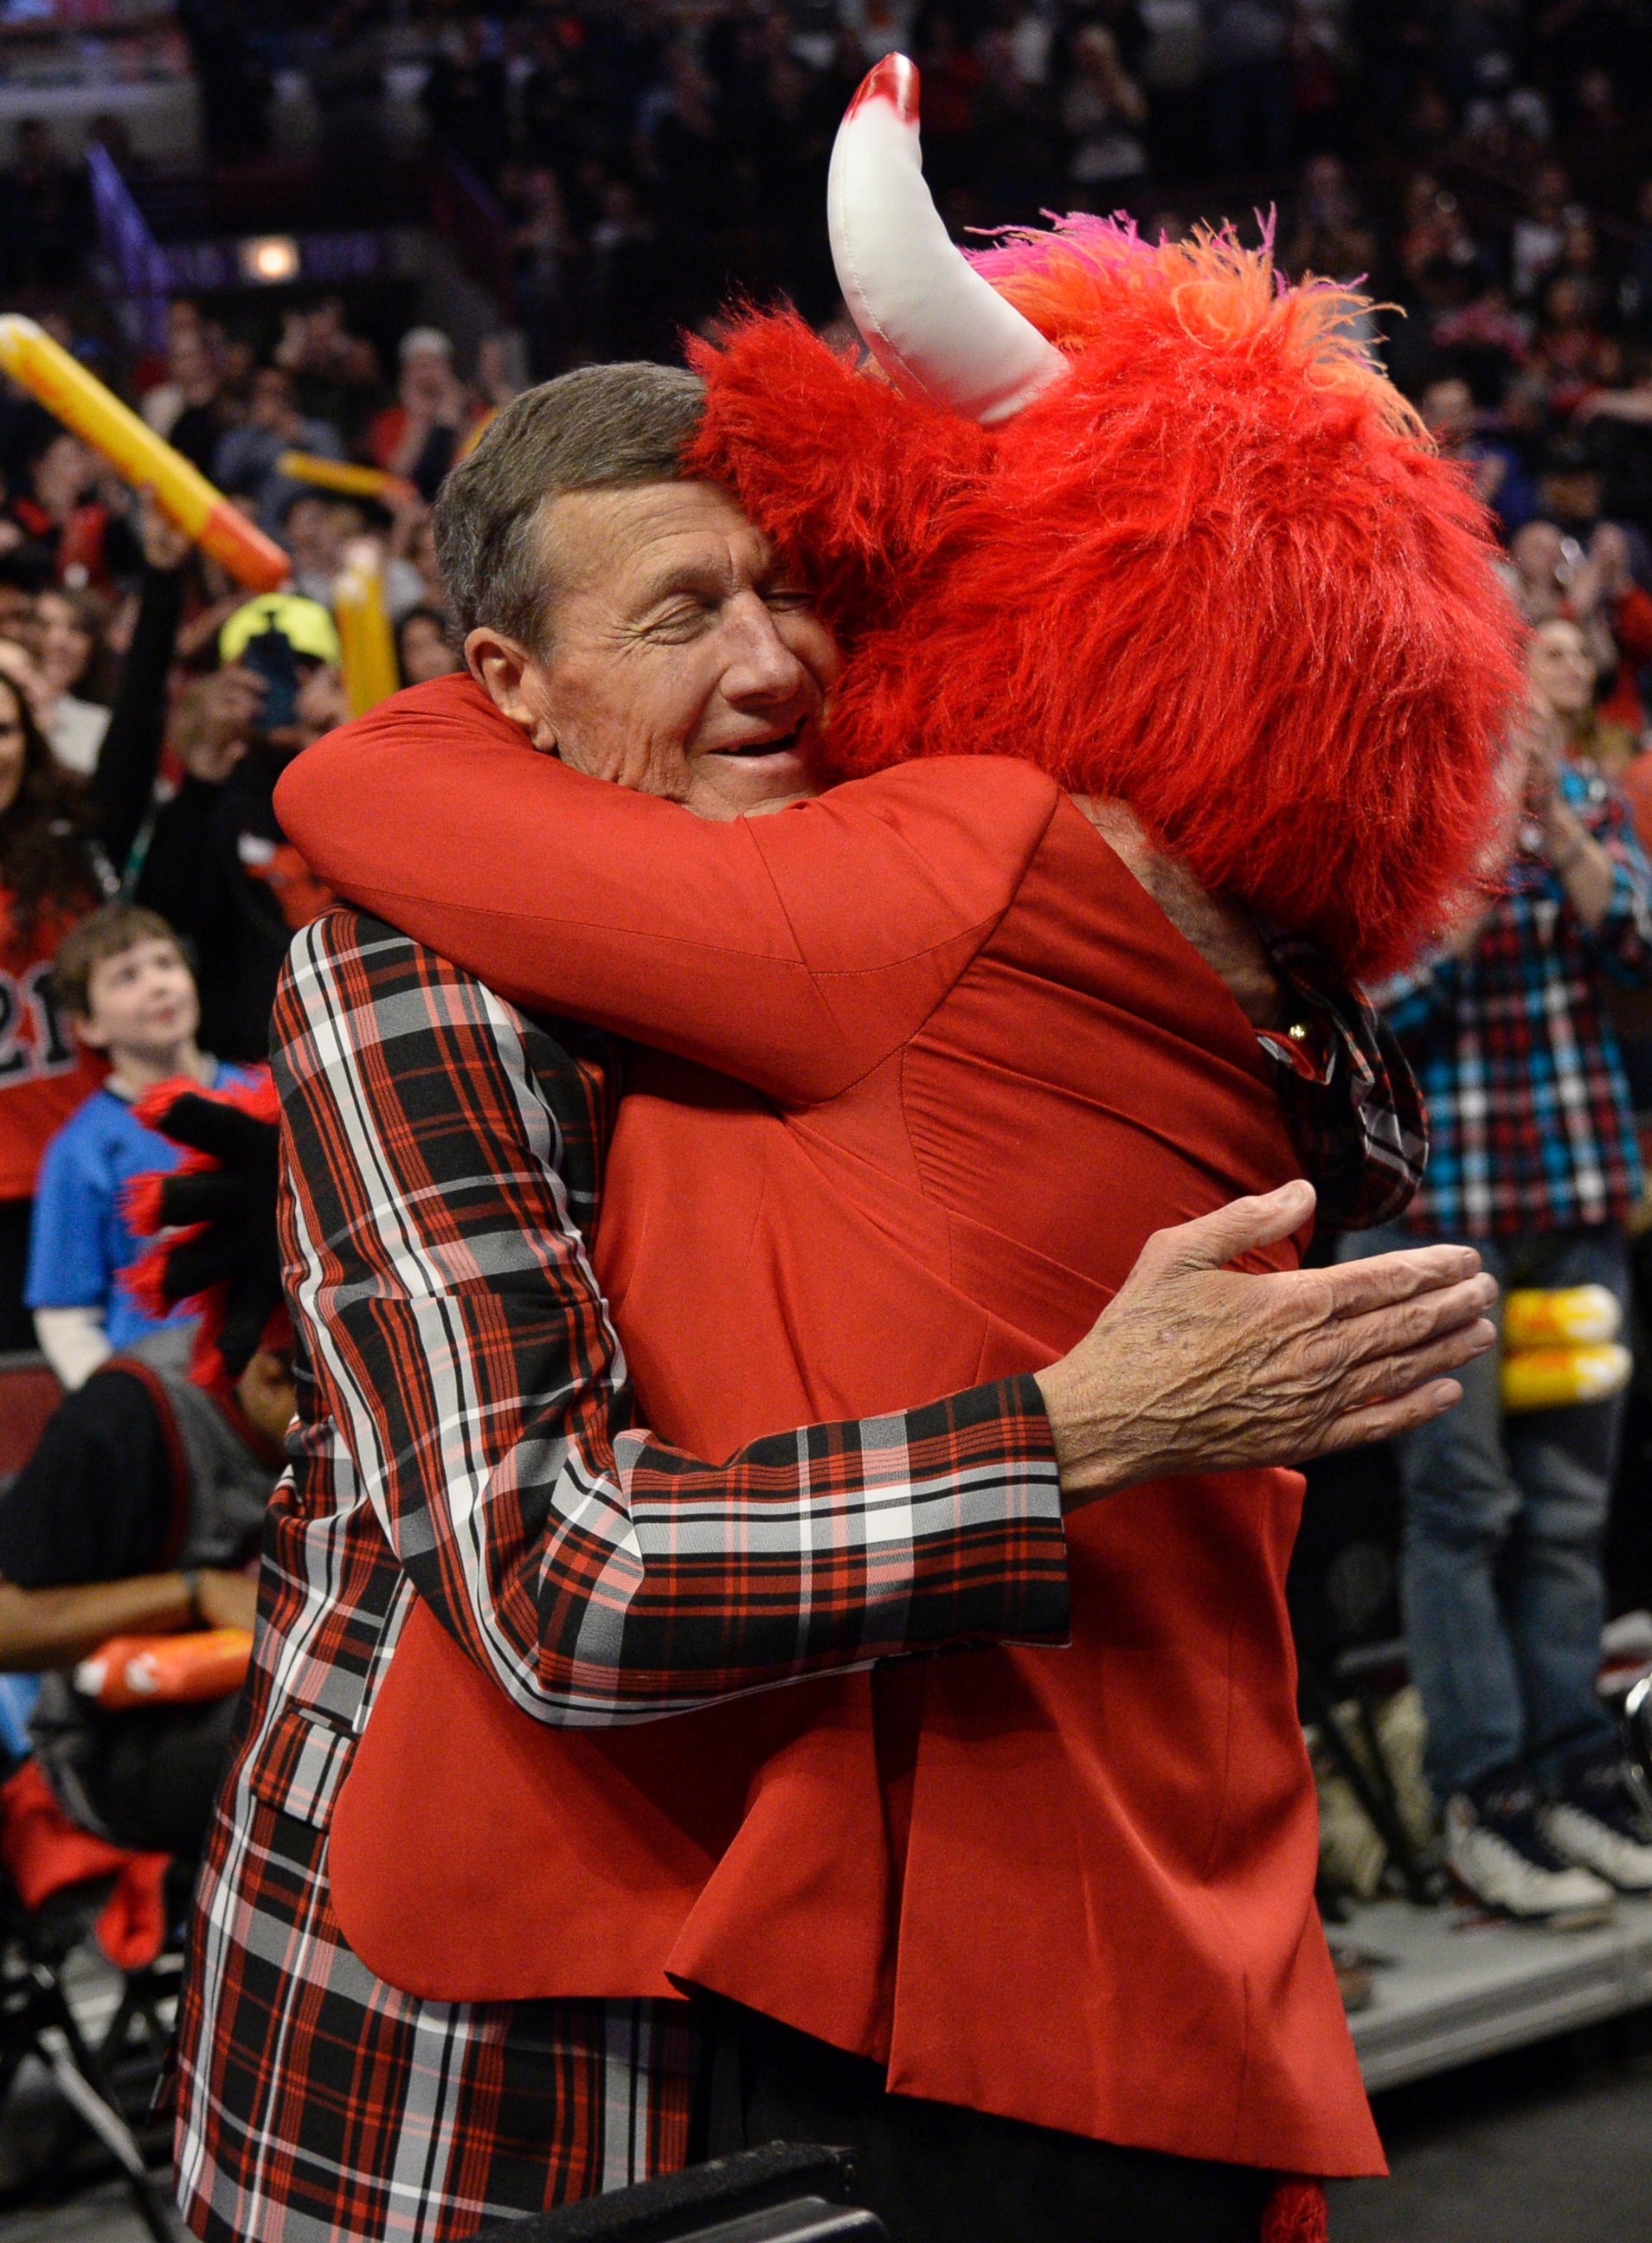 PHOTO: Craig Sager gets a hug from Benny the Bull during a timeout of a game between the Chicago Bulls and the Oklahoma City Thunder, March 5, 2015 in Chicago.